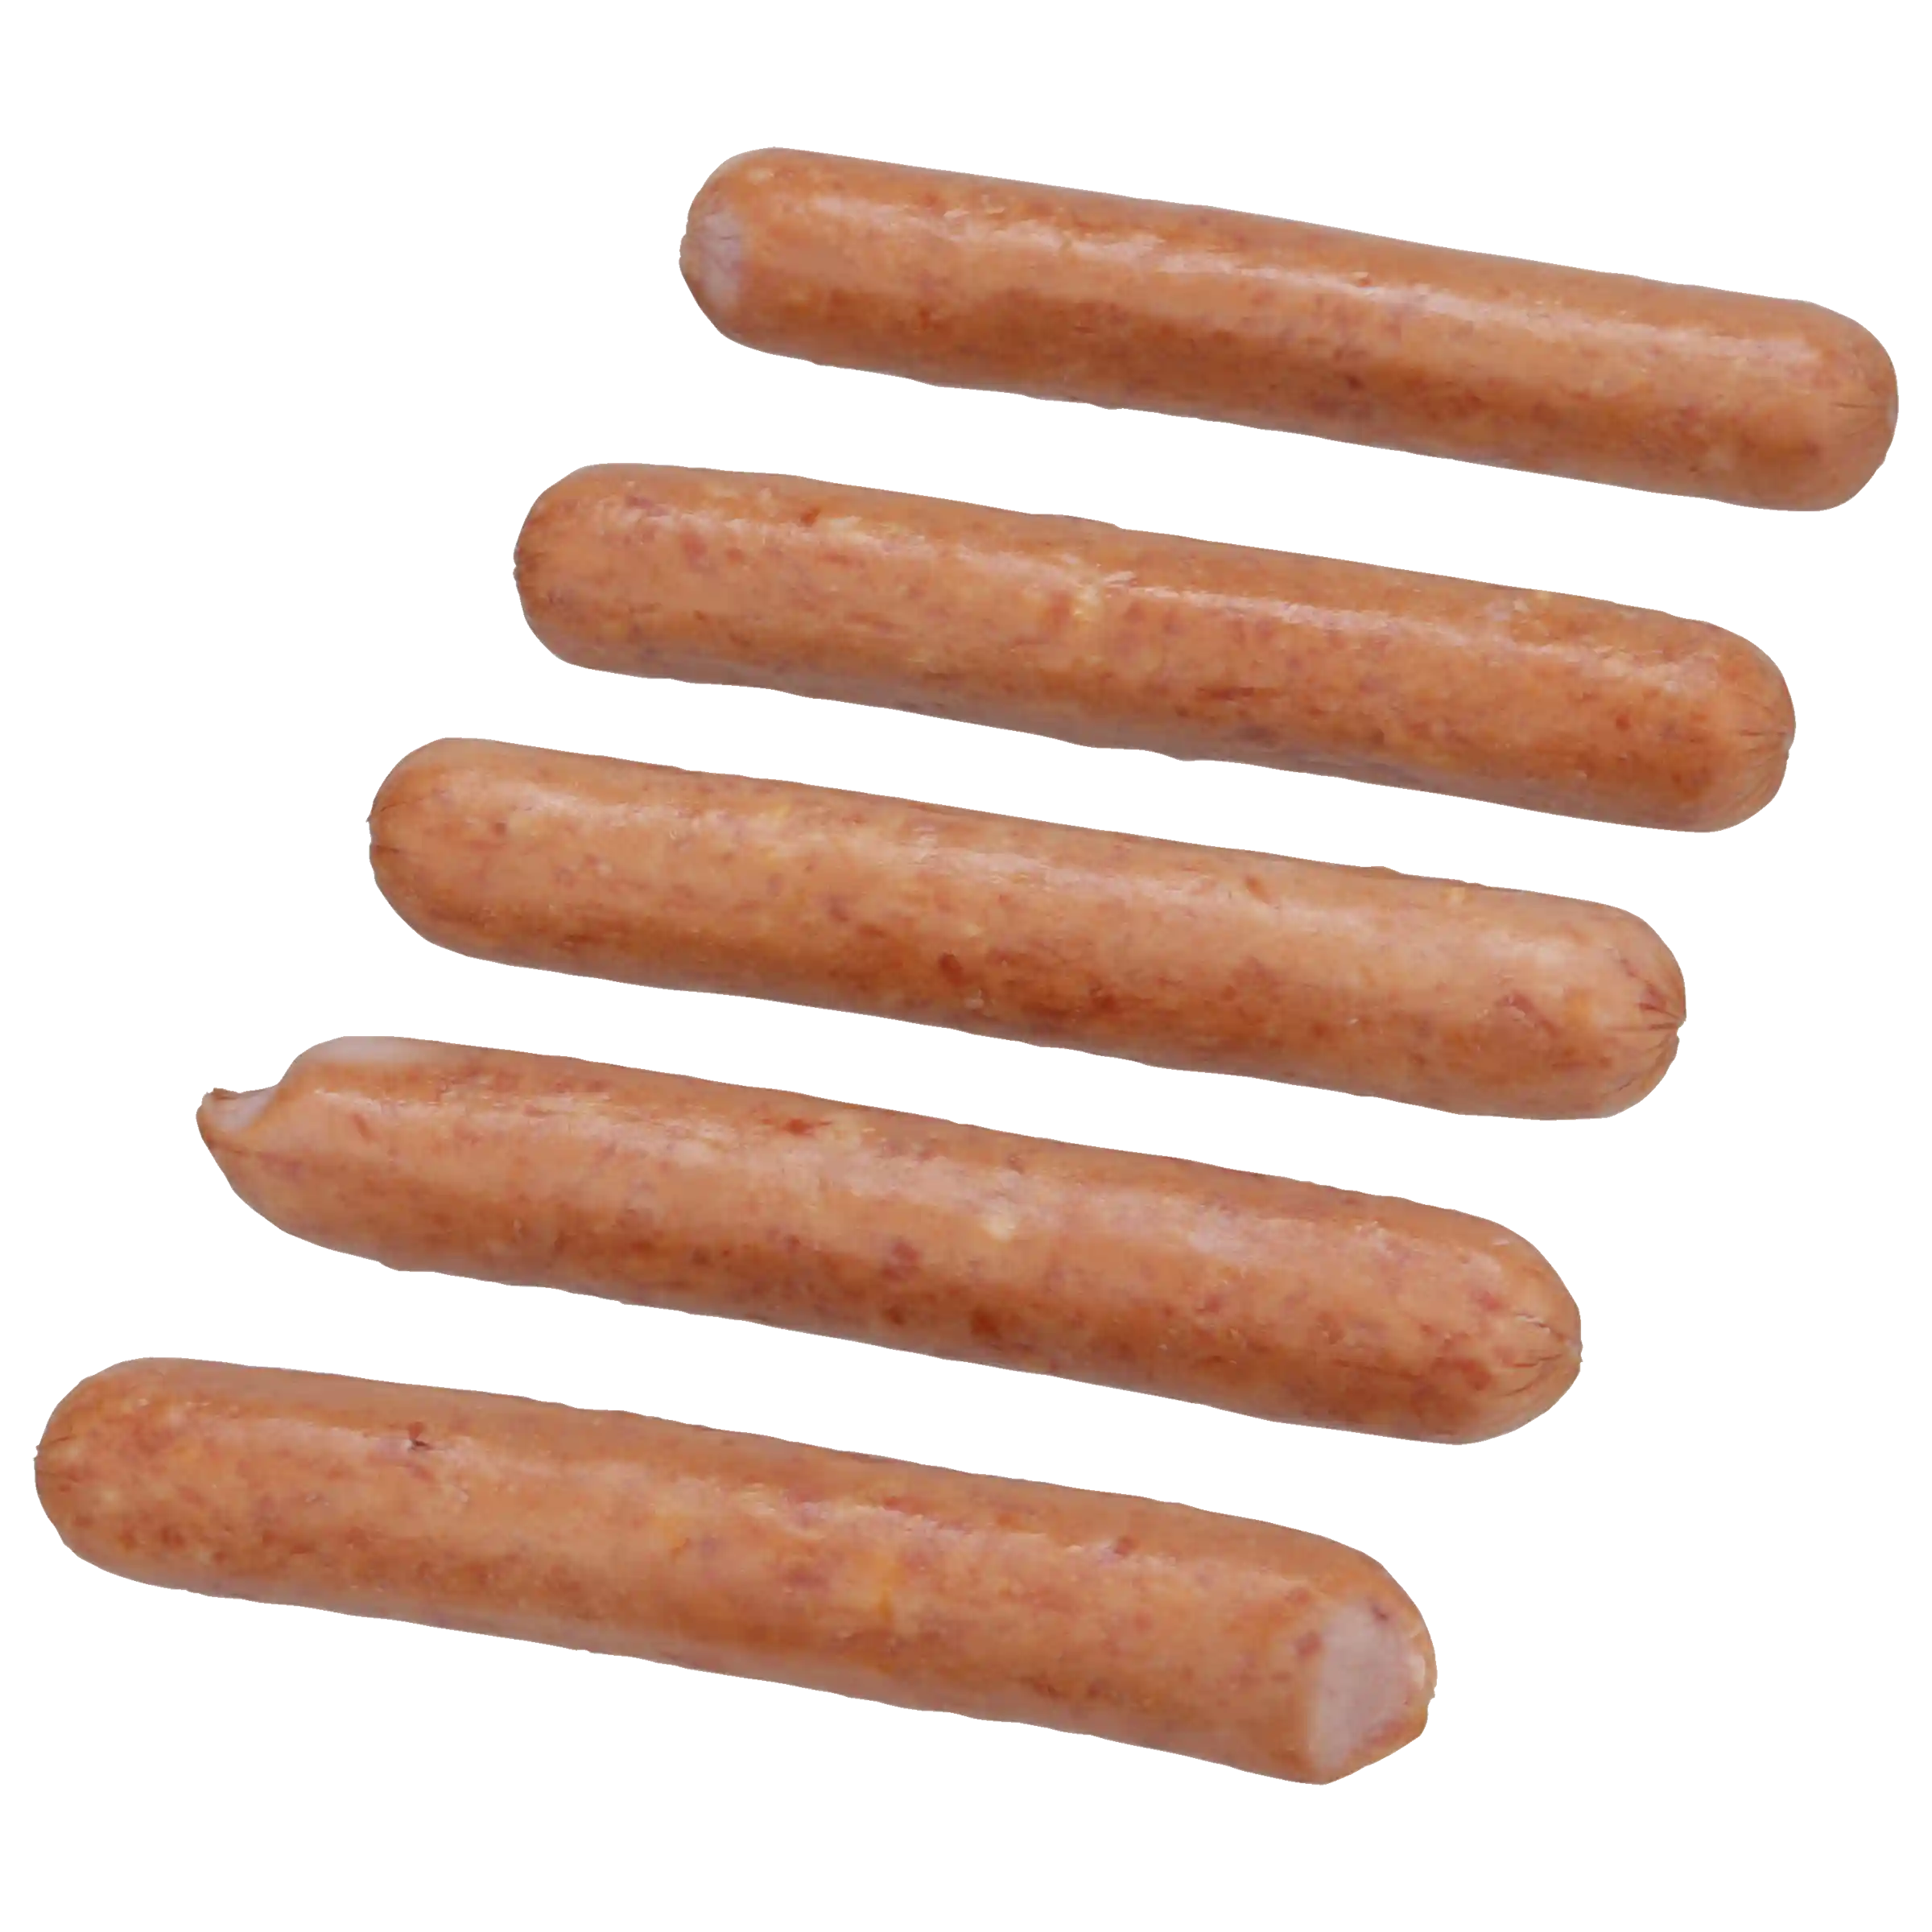 Hillshire Farm® Cheddarwurst® Fully Cooked Polish Skinless Dinner Sausage Links, 6:1 Links Per Lb, 6 Inch, Frozen_image_11